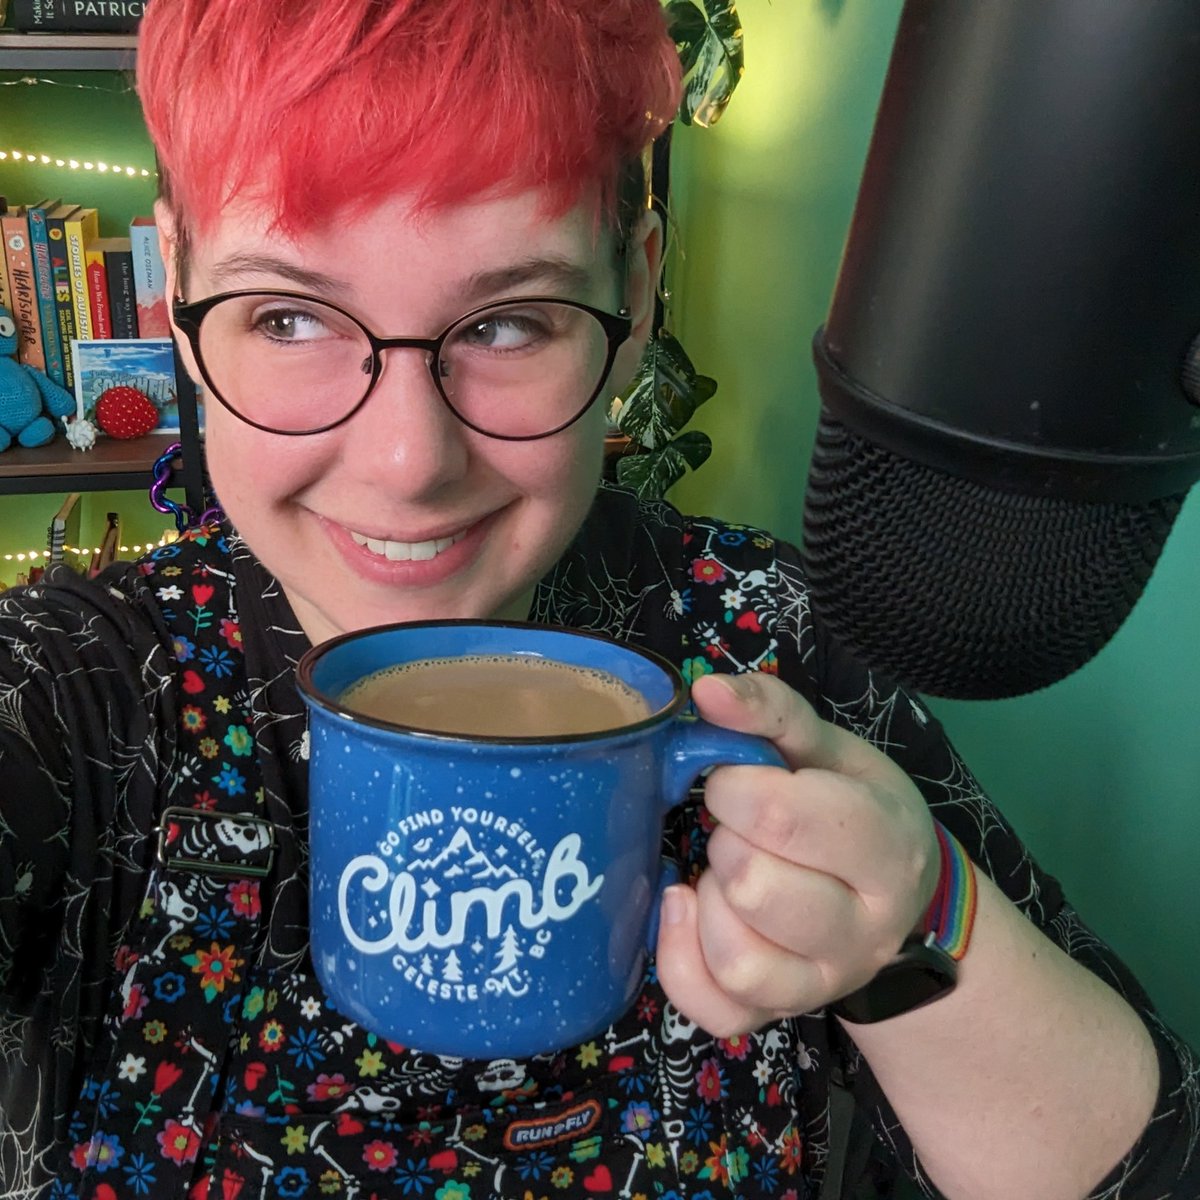 just a lil badeline 💜 sippin on mountain fuel, ready for another @celeste_game stream 💪 whaddaya think of my new mug? 👀 raising funds for @SafeInOurWorld and supporting game dev mental health ✨ LIVE 🔴 twitch.tv/heckin_flop